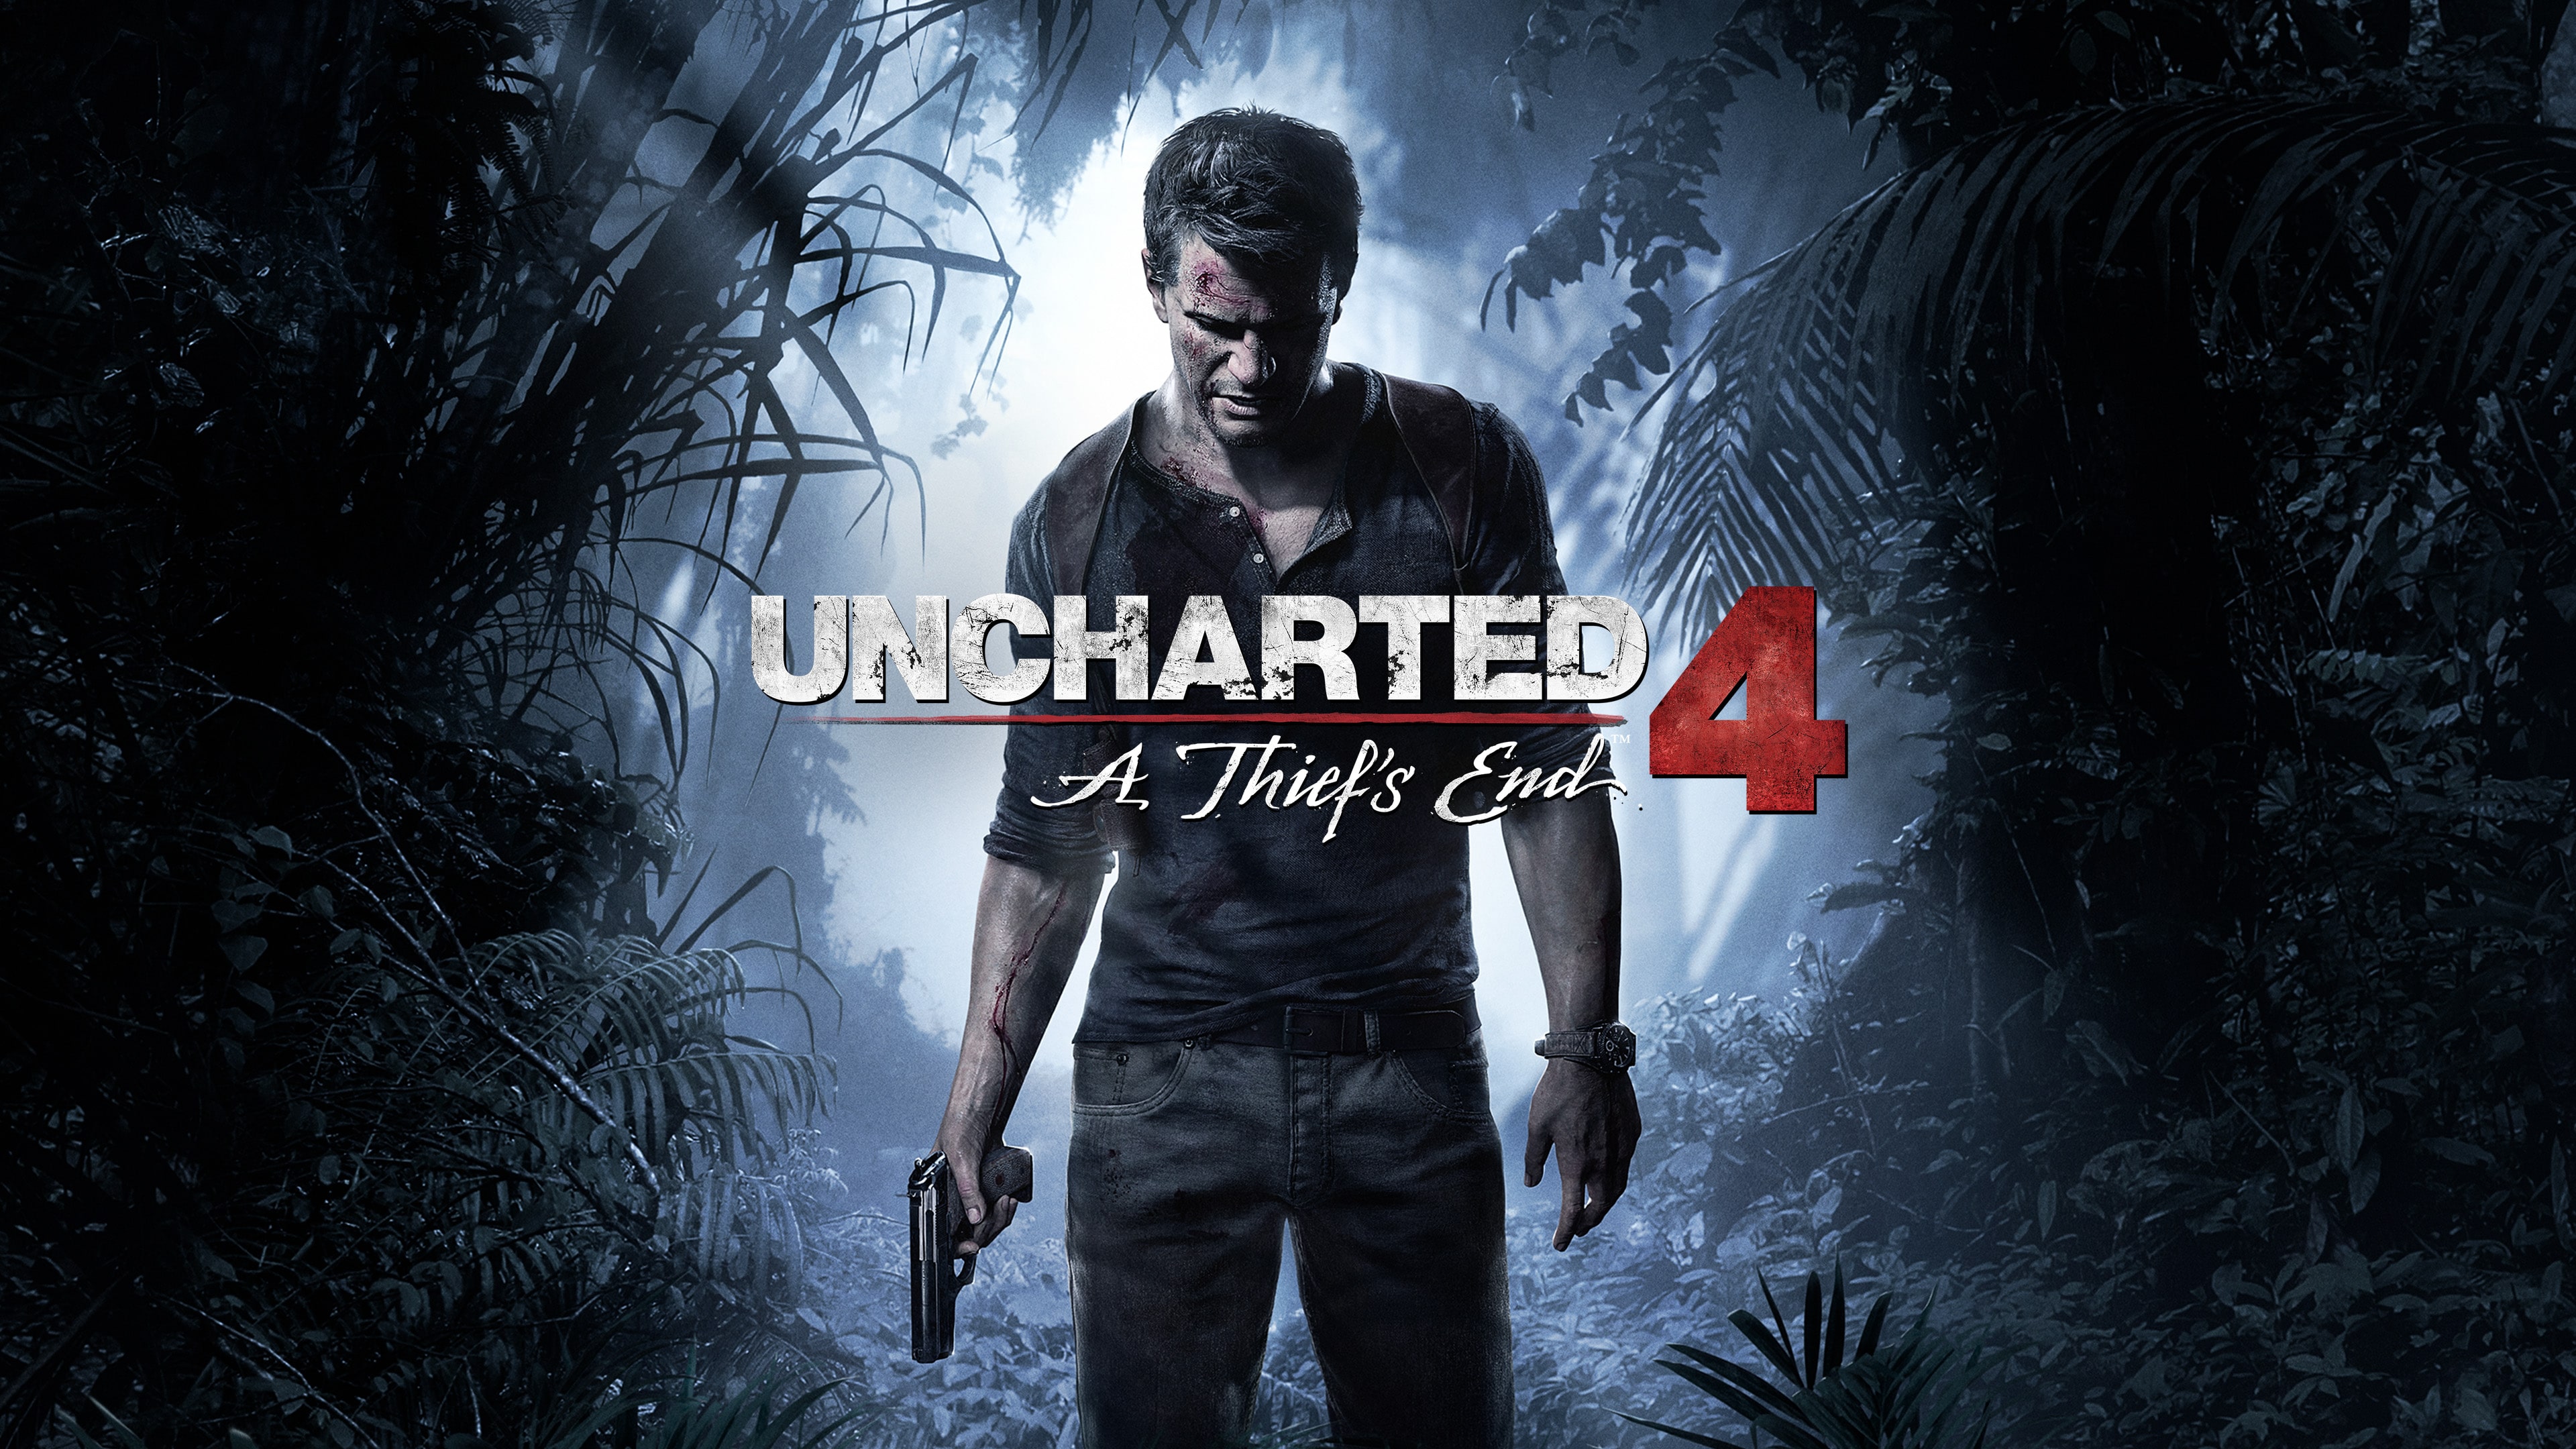 UNCHARTED 4: A Thief’s End